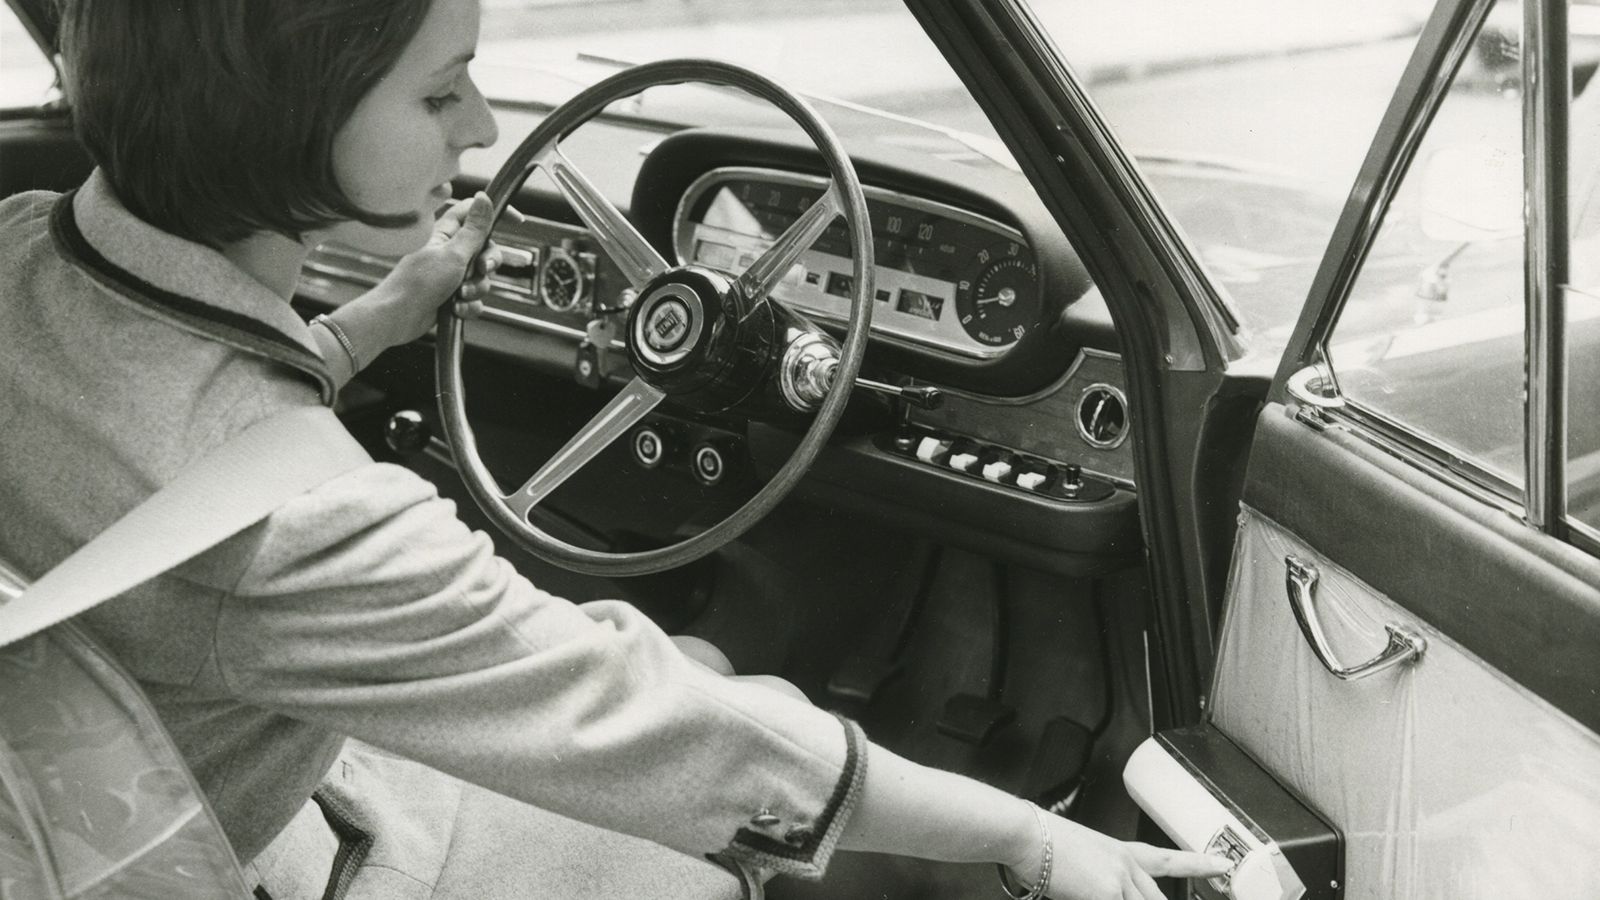 8 Vintage Car Accessories You Seldom See Today